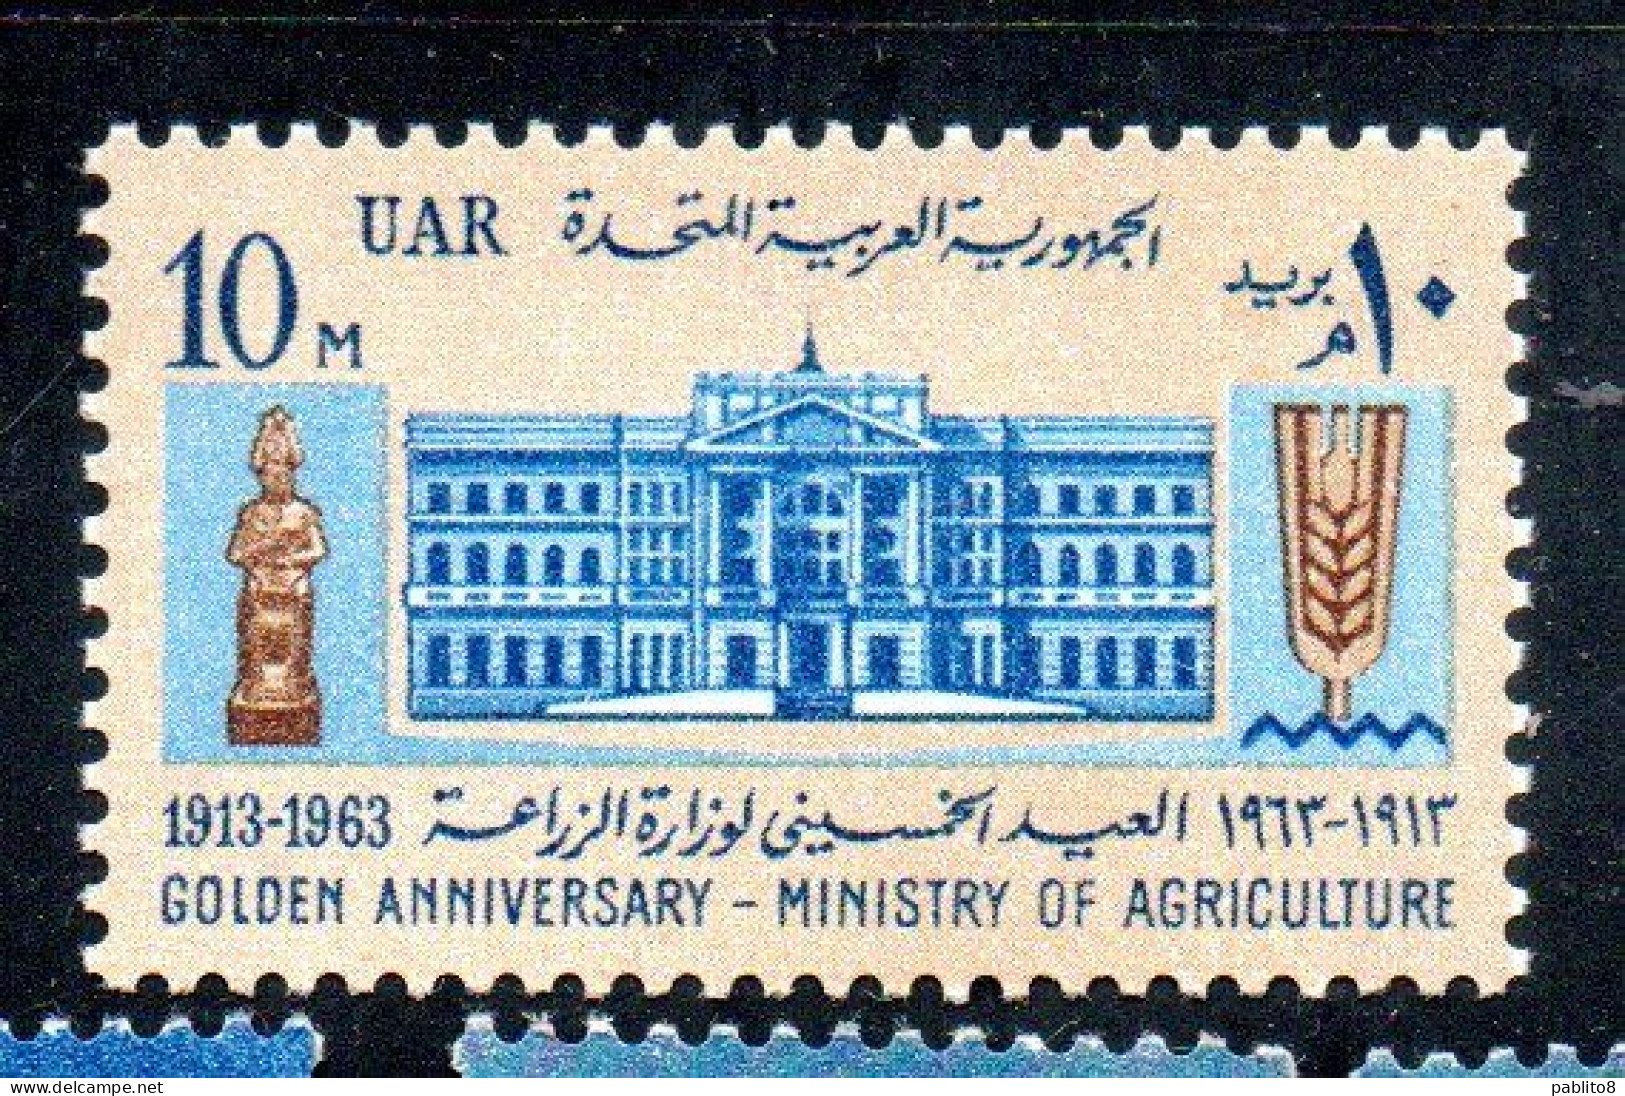 UAR EGYPT EGITTO 1963 50th ANNIVERSARY OF MINISTRY OF AGRICULTURAL 10m MNH - Nuevos